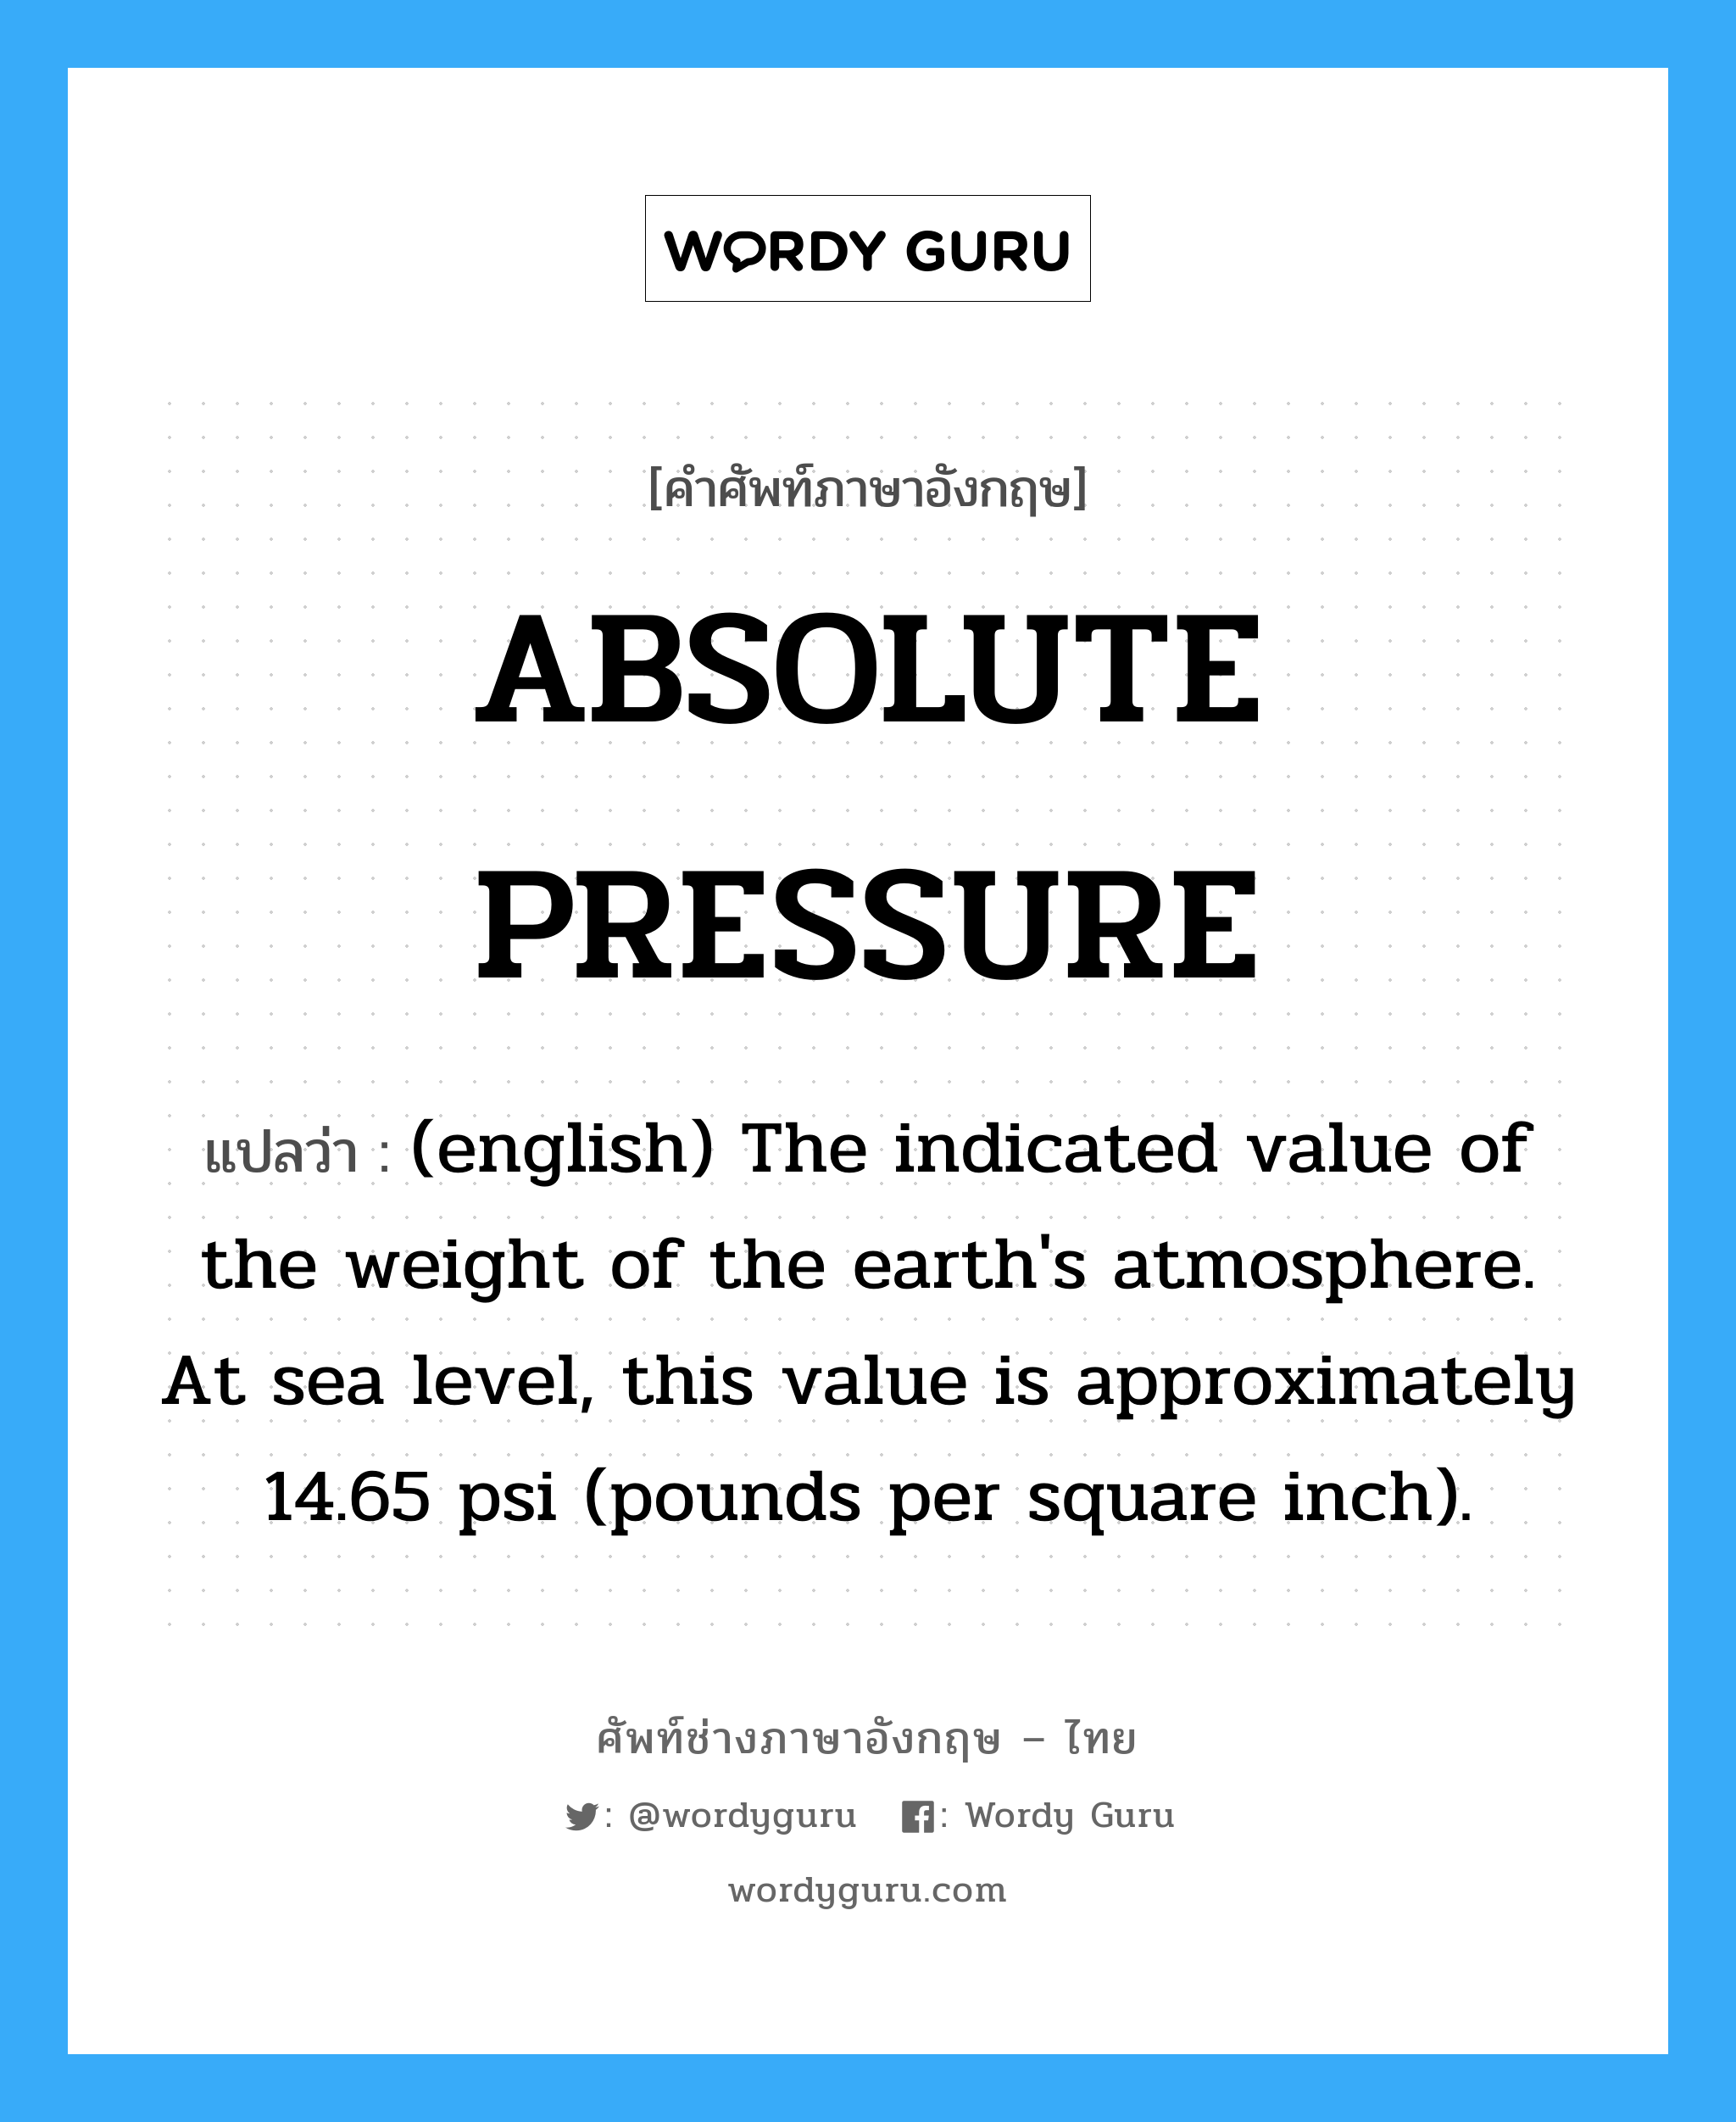 ABSOLUTE PRESSURE แปลว่า?, คำศัพท์ช่างภาษาอังกฤษ - ไทย ABSOLUTE PRESSURE คำศัพท์ภาษาอังกฤษ ABSOLUTE PRESSURE แปลว่า (english) The indicated value of the weight of the earth's atmosphere. At sea level, this value is approximately 14.65 psi (pounds per square inch).